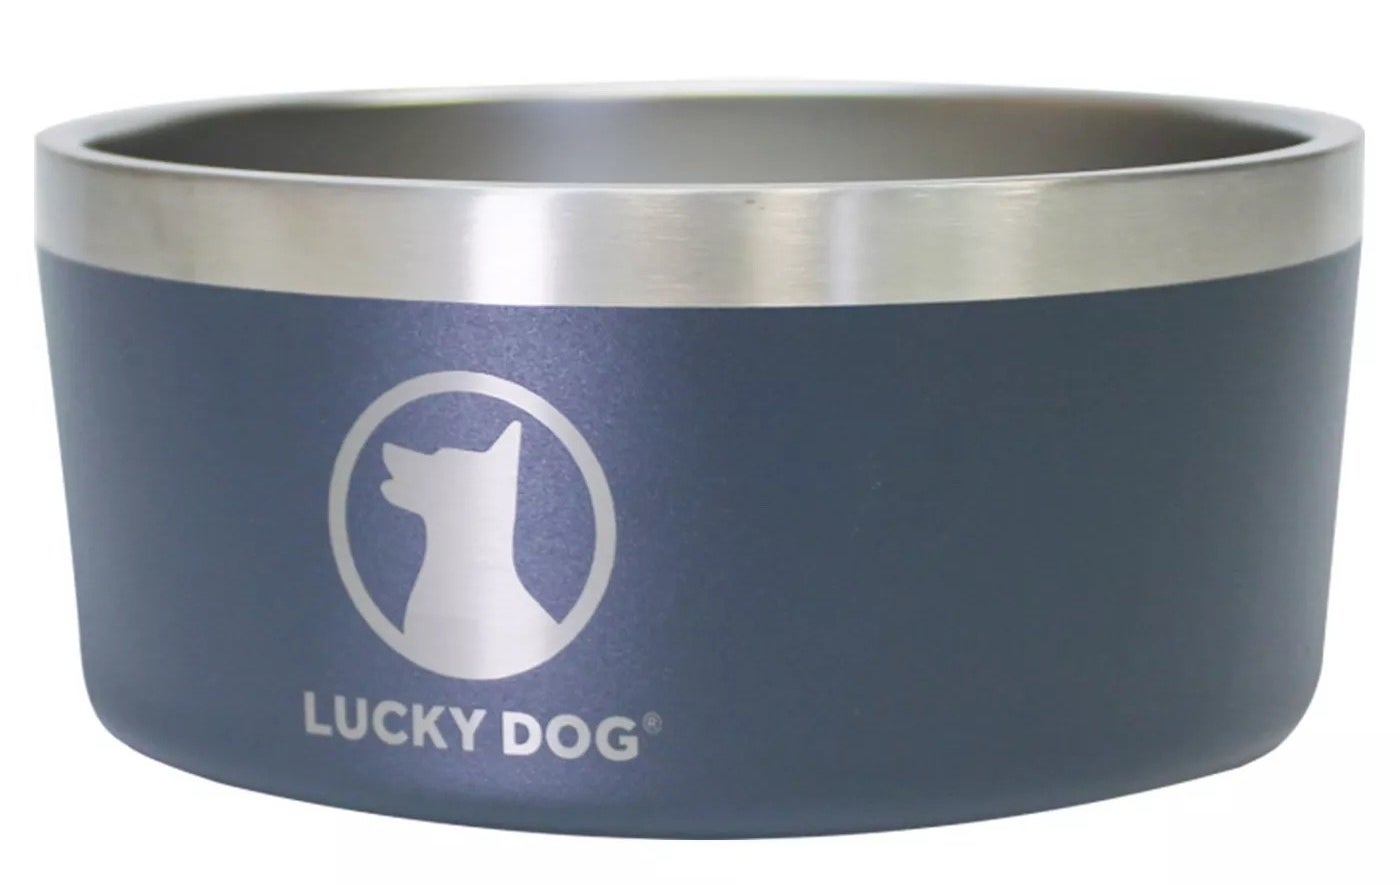 The stainless steel dog bowl